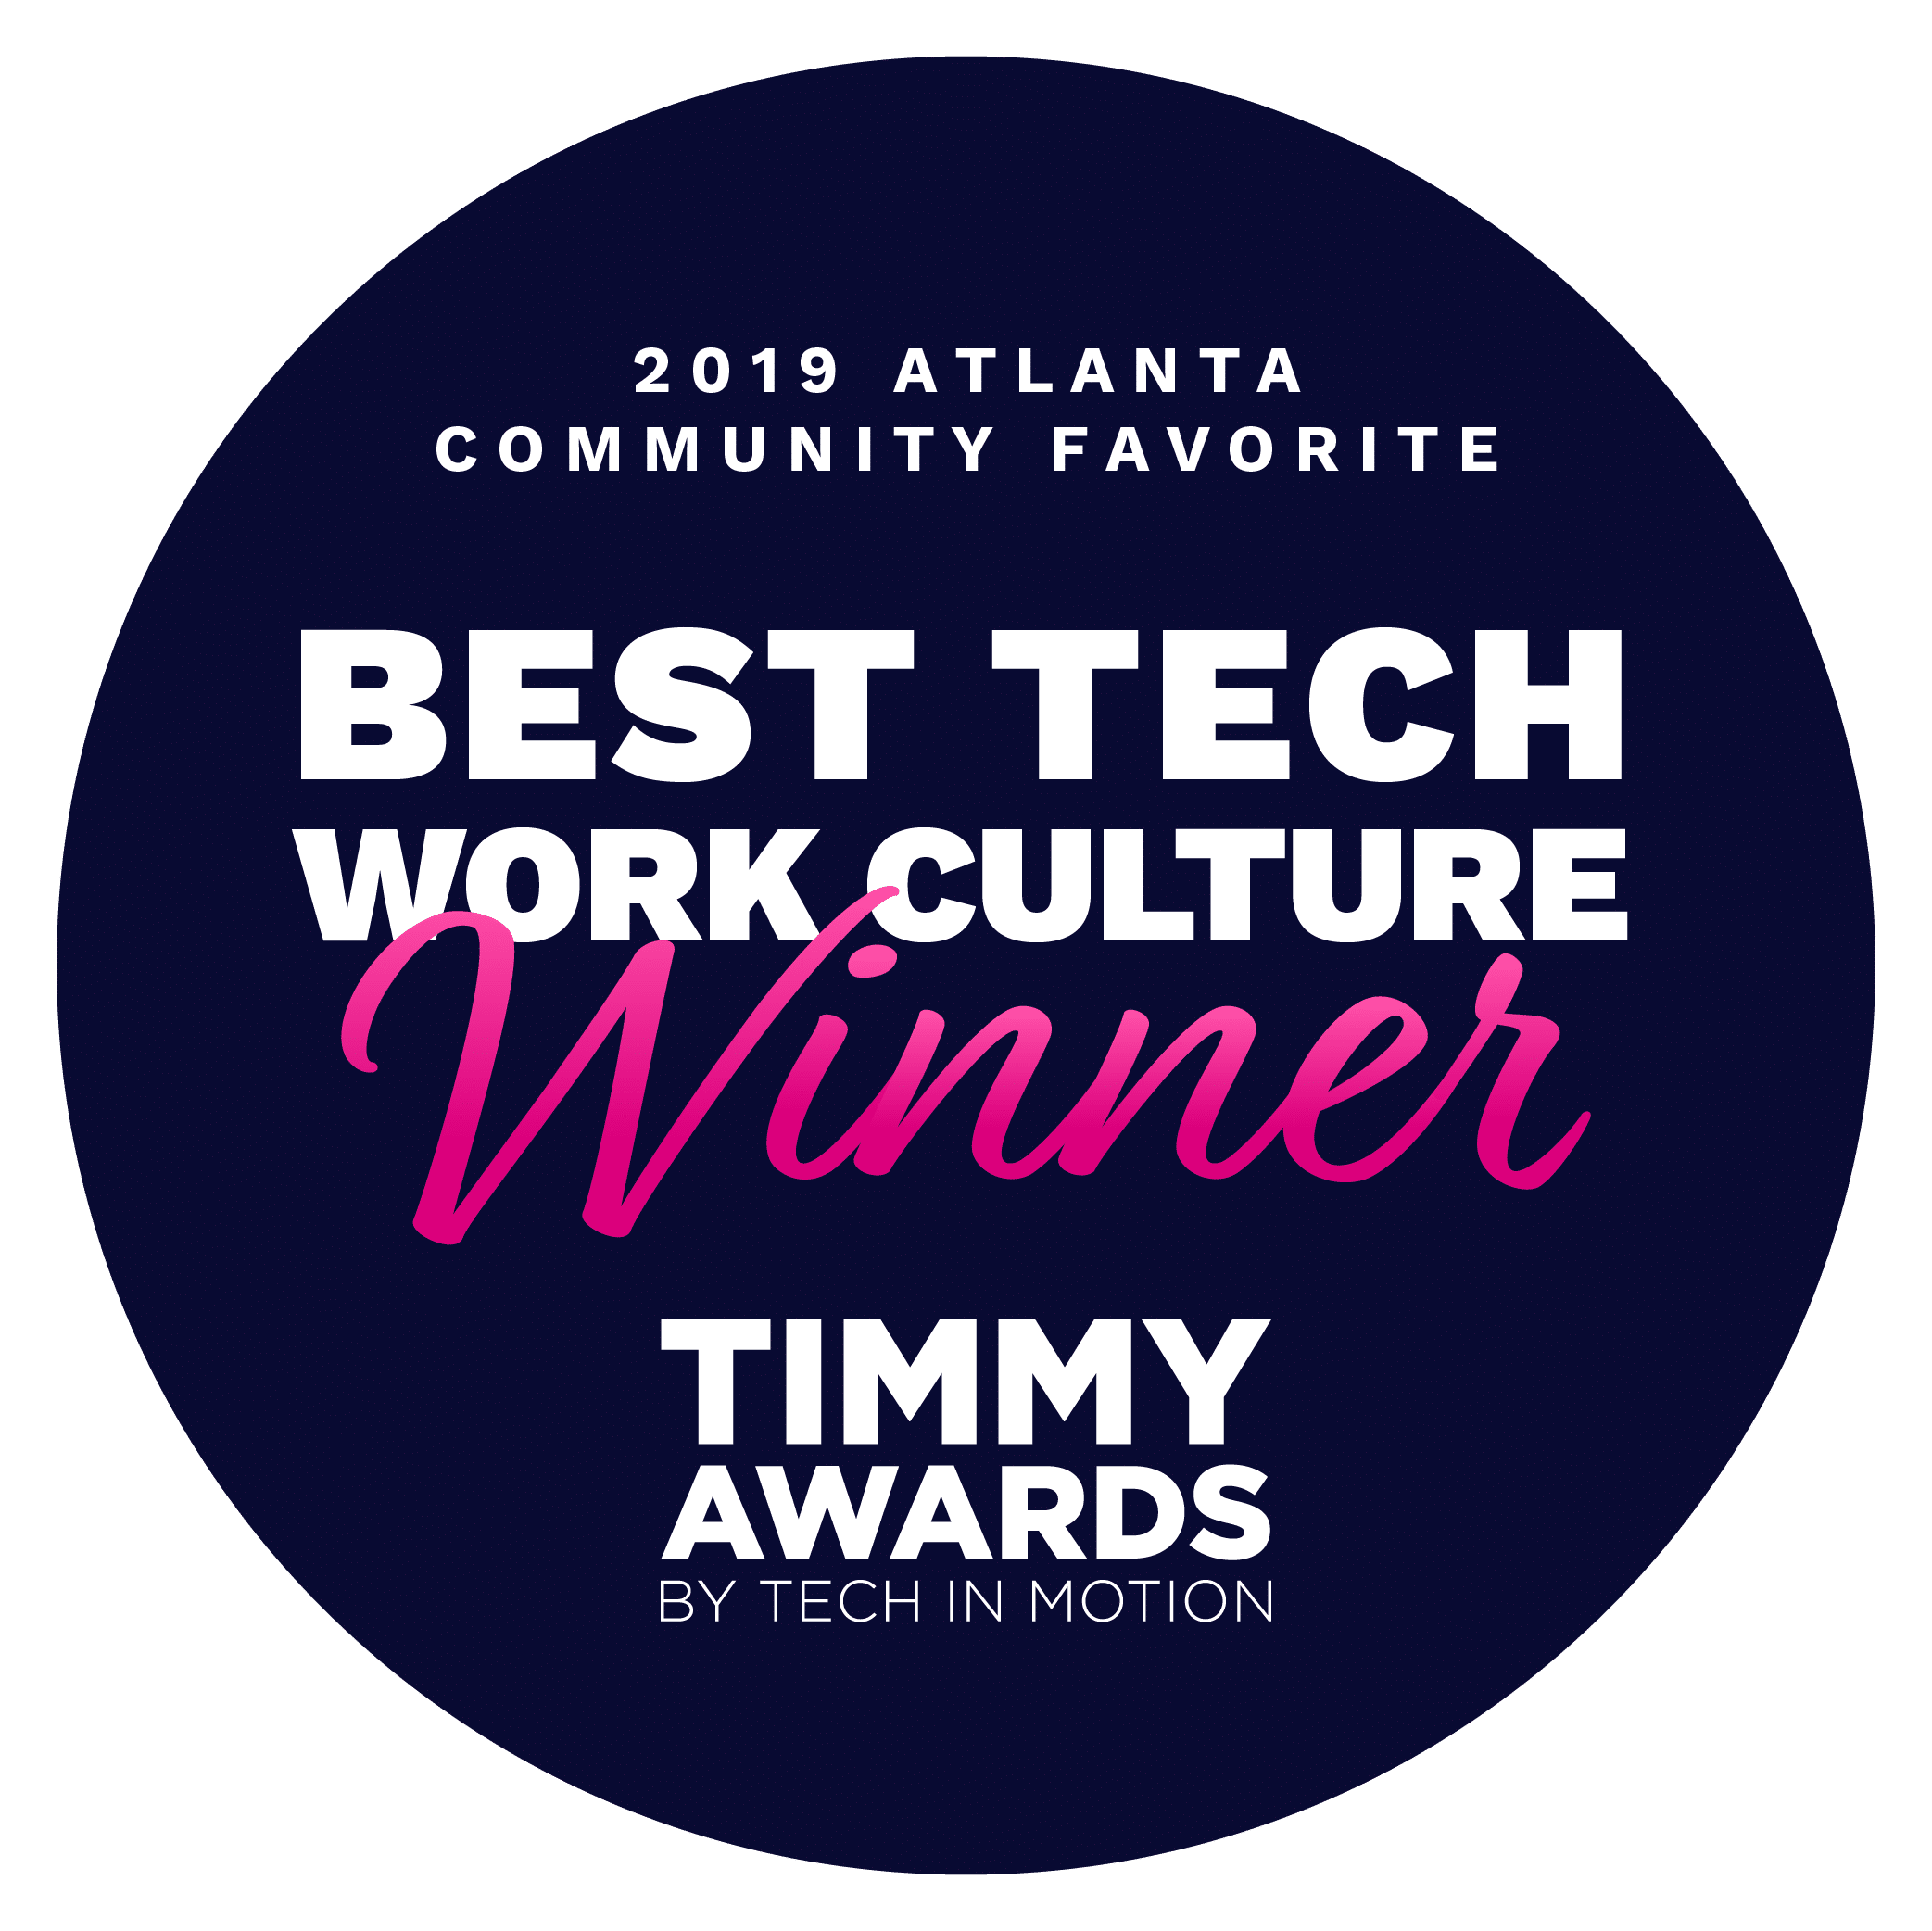 AnalyticsIQ Voted Best Tech Work Culture at the Timmy Awards